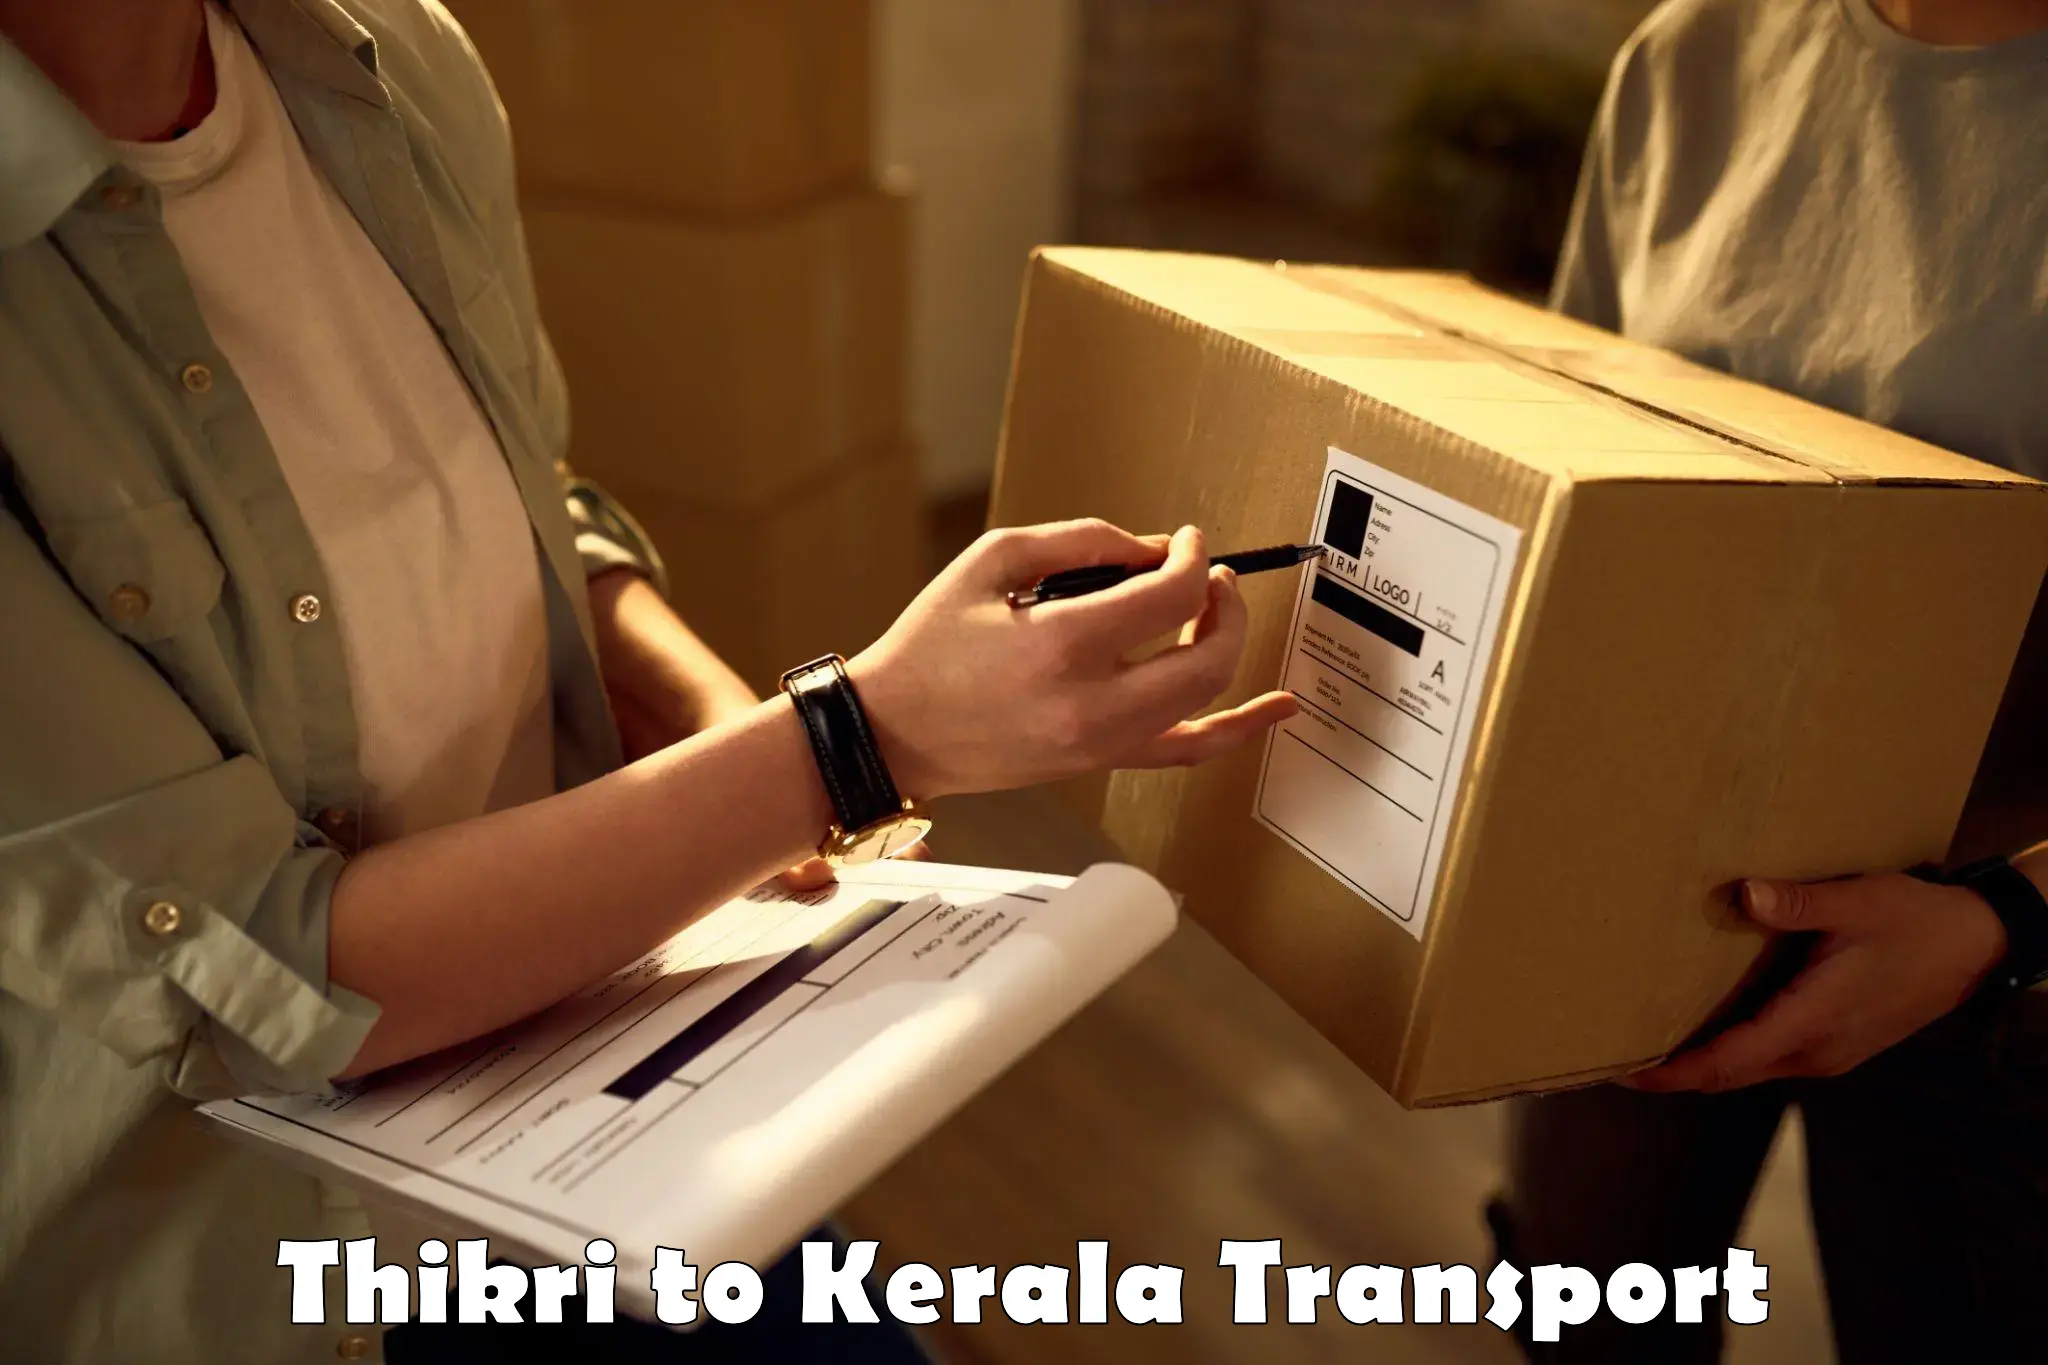 Delivery service Thikri to Kannur